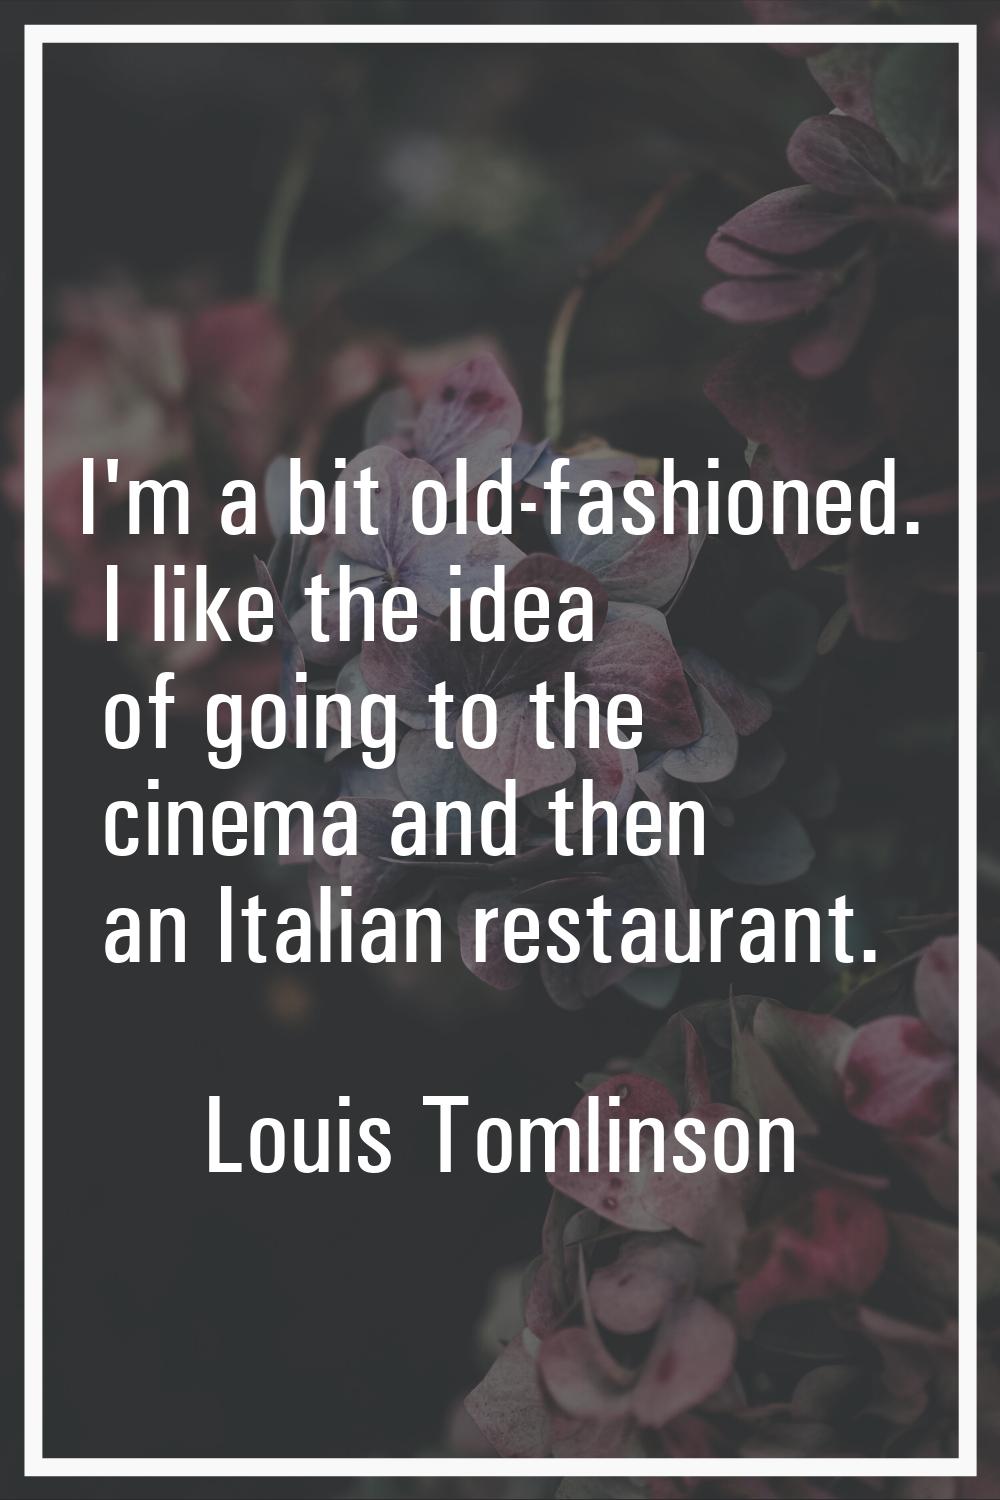 I'm a bit old-fashioned. I like the idea of going to the cinema and then an Italian restaurant.